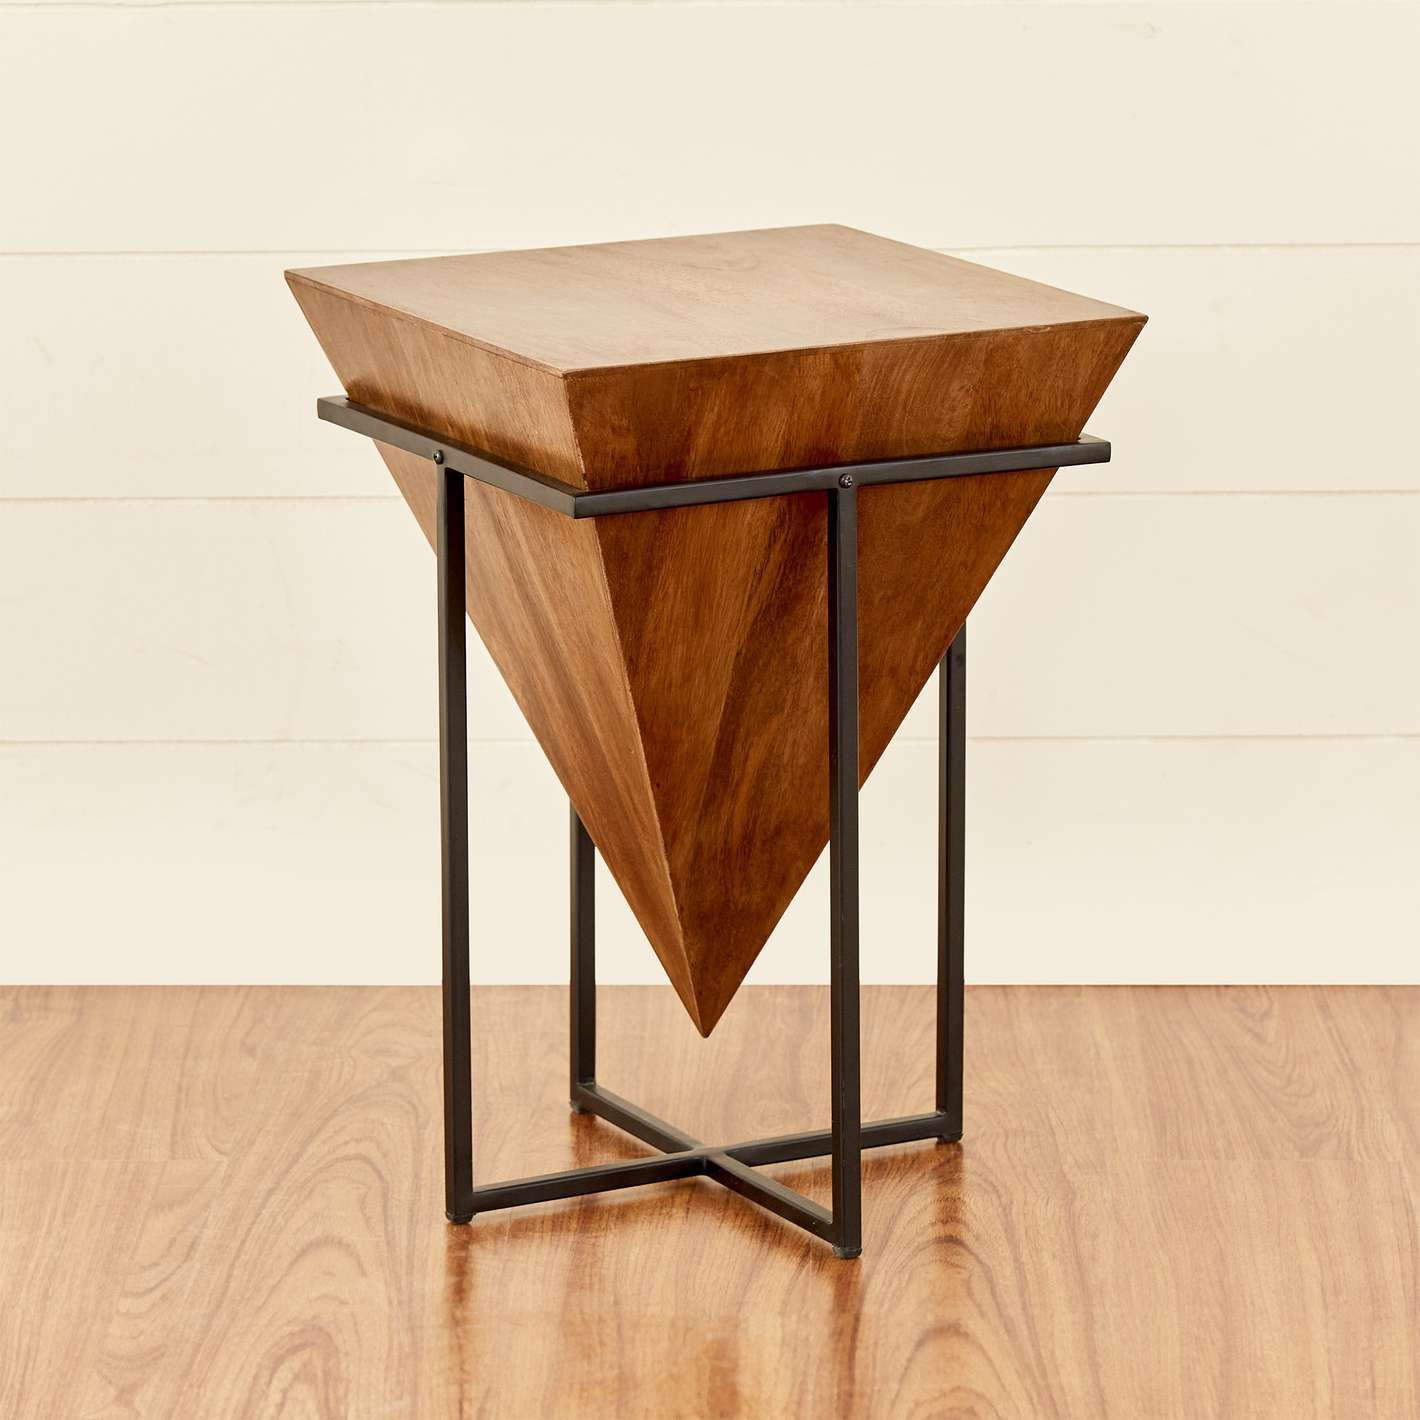 Aaram By Zebrs Metal Side Table (Finish Color - Brown, Pre-assembled)